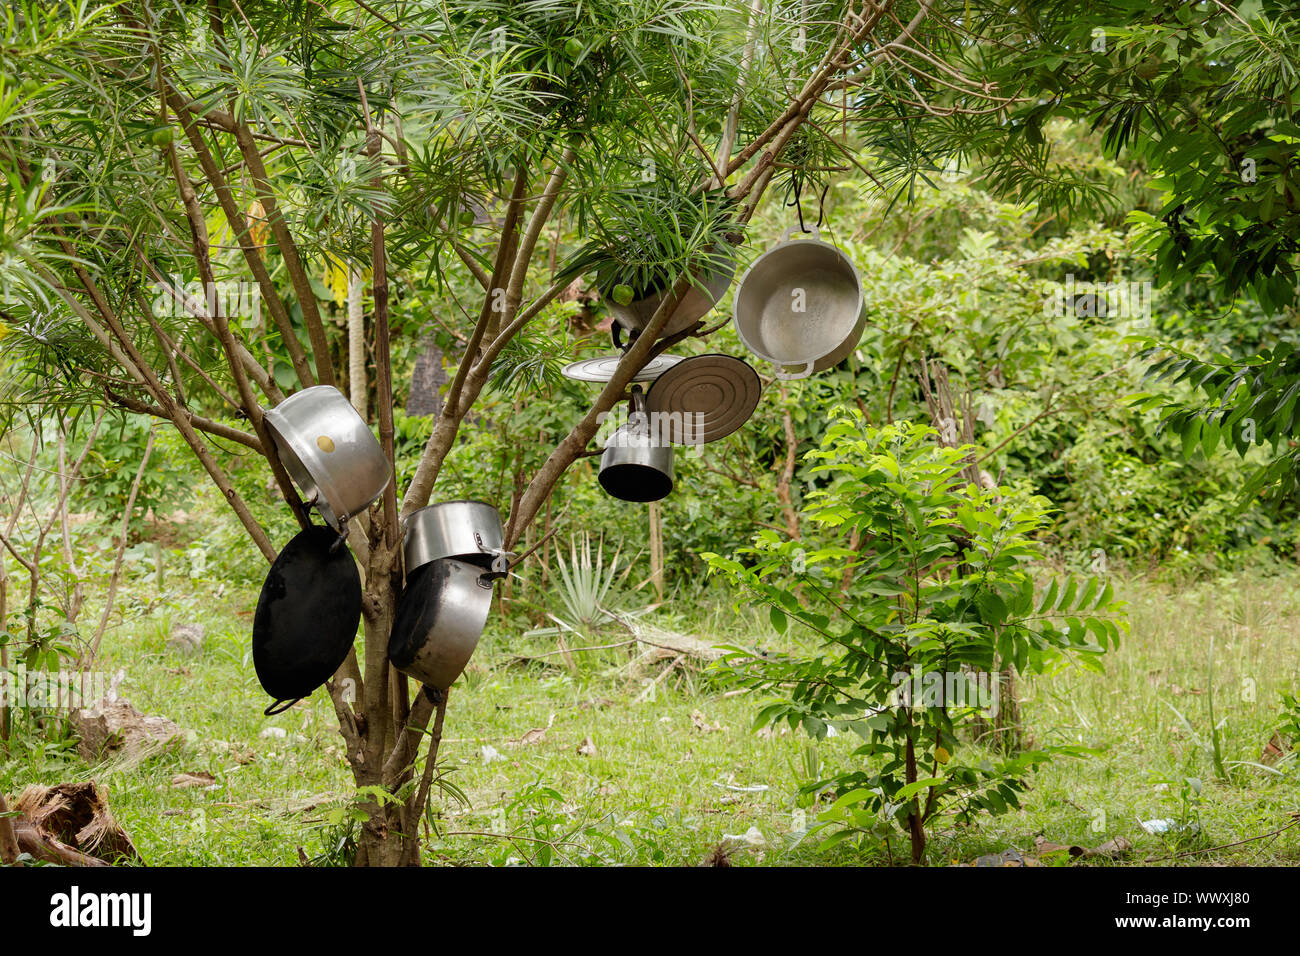 Cooking utensils hanging from a tree in rural Cambodia. Stock Photo